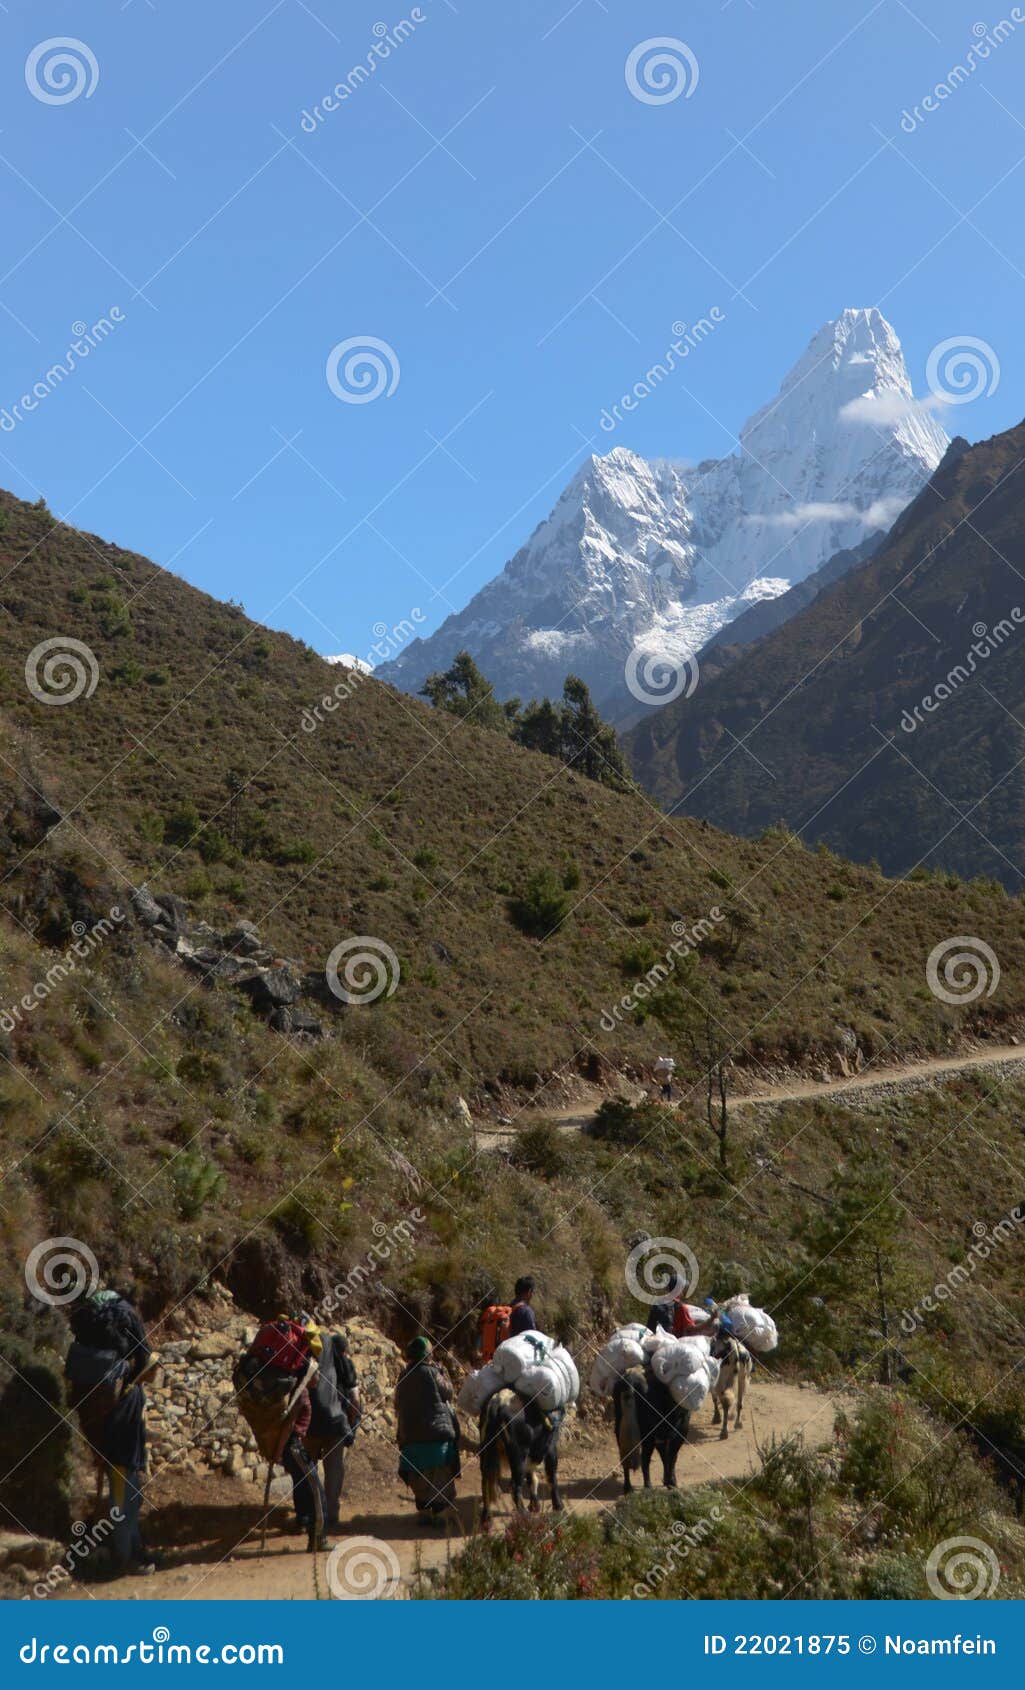 Nepali Porters in the Everest Trail Editorial Image - Image of cargo